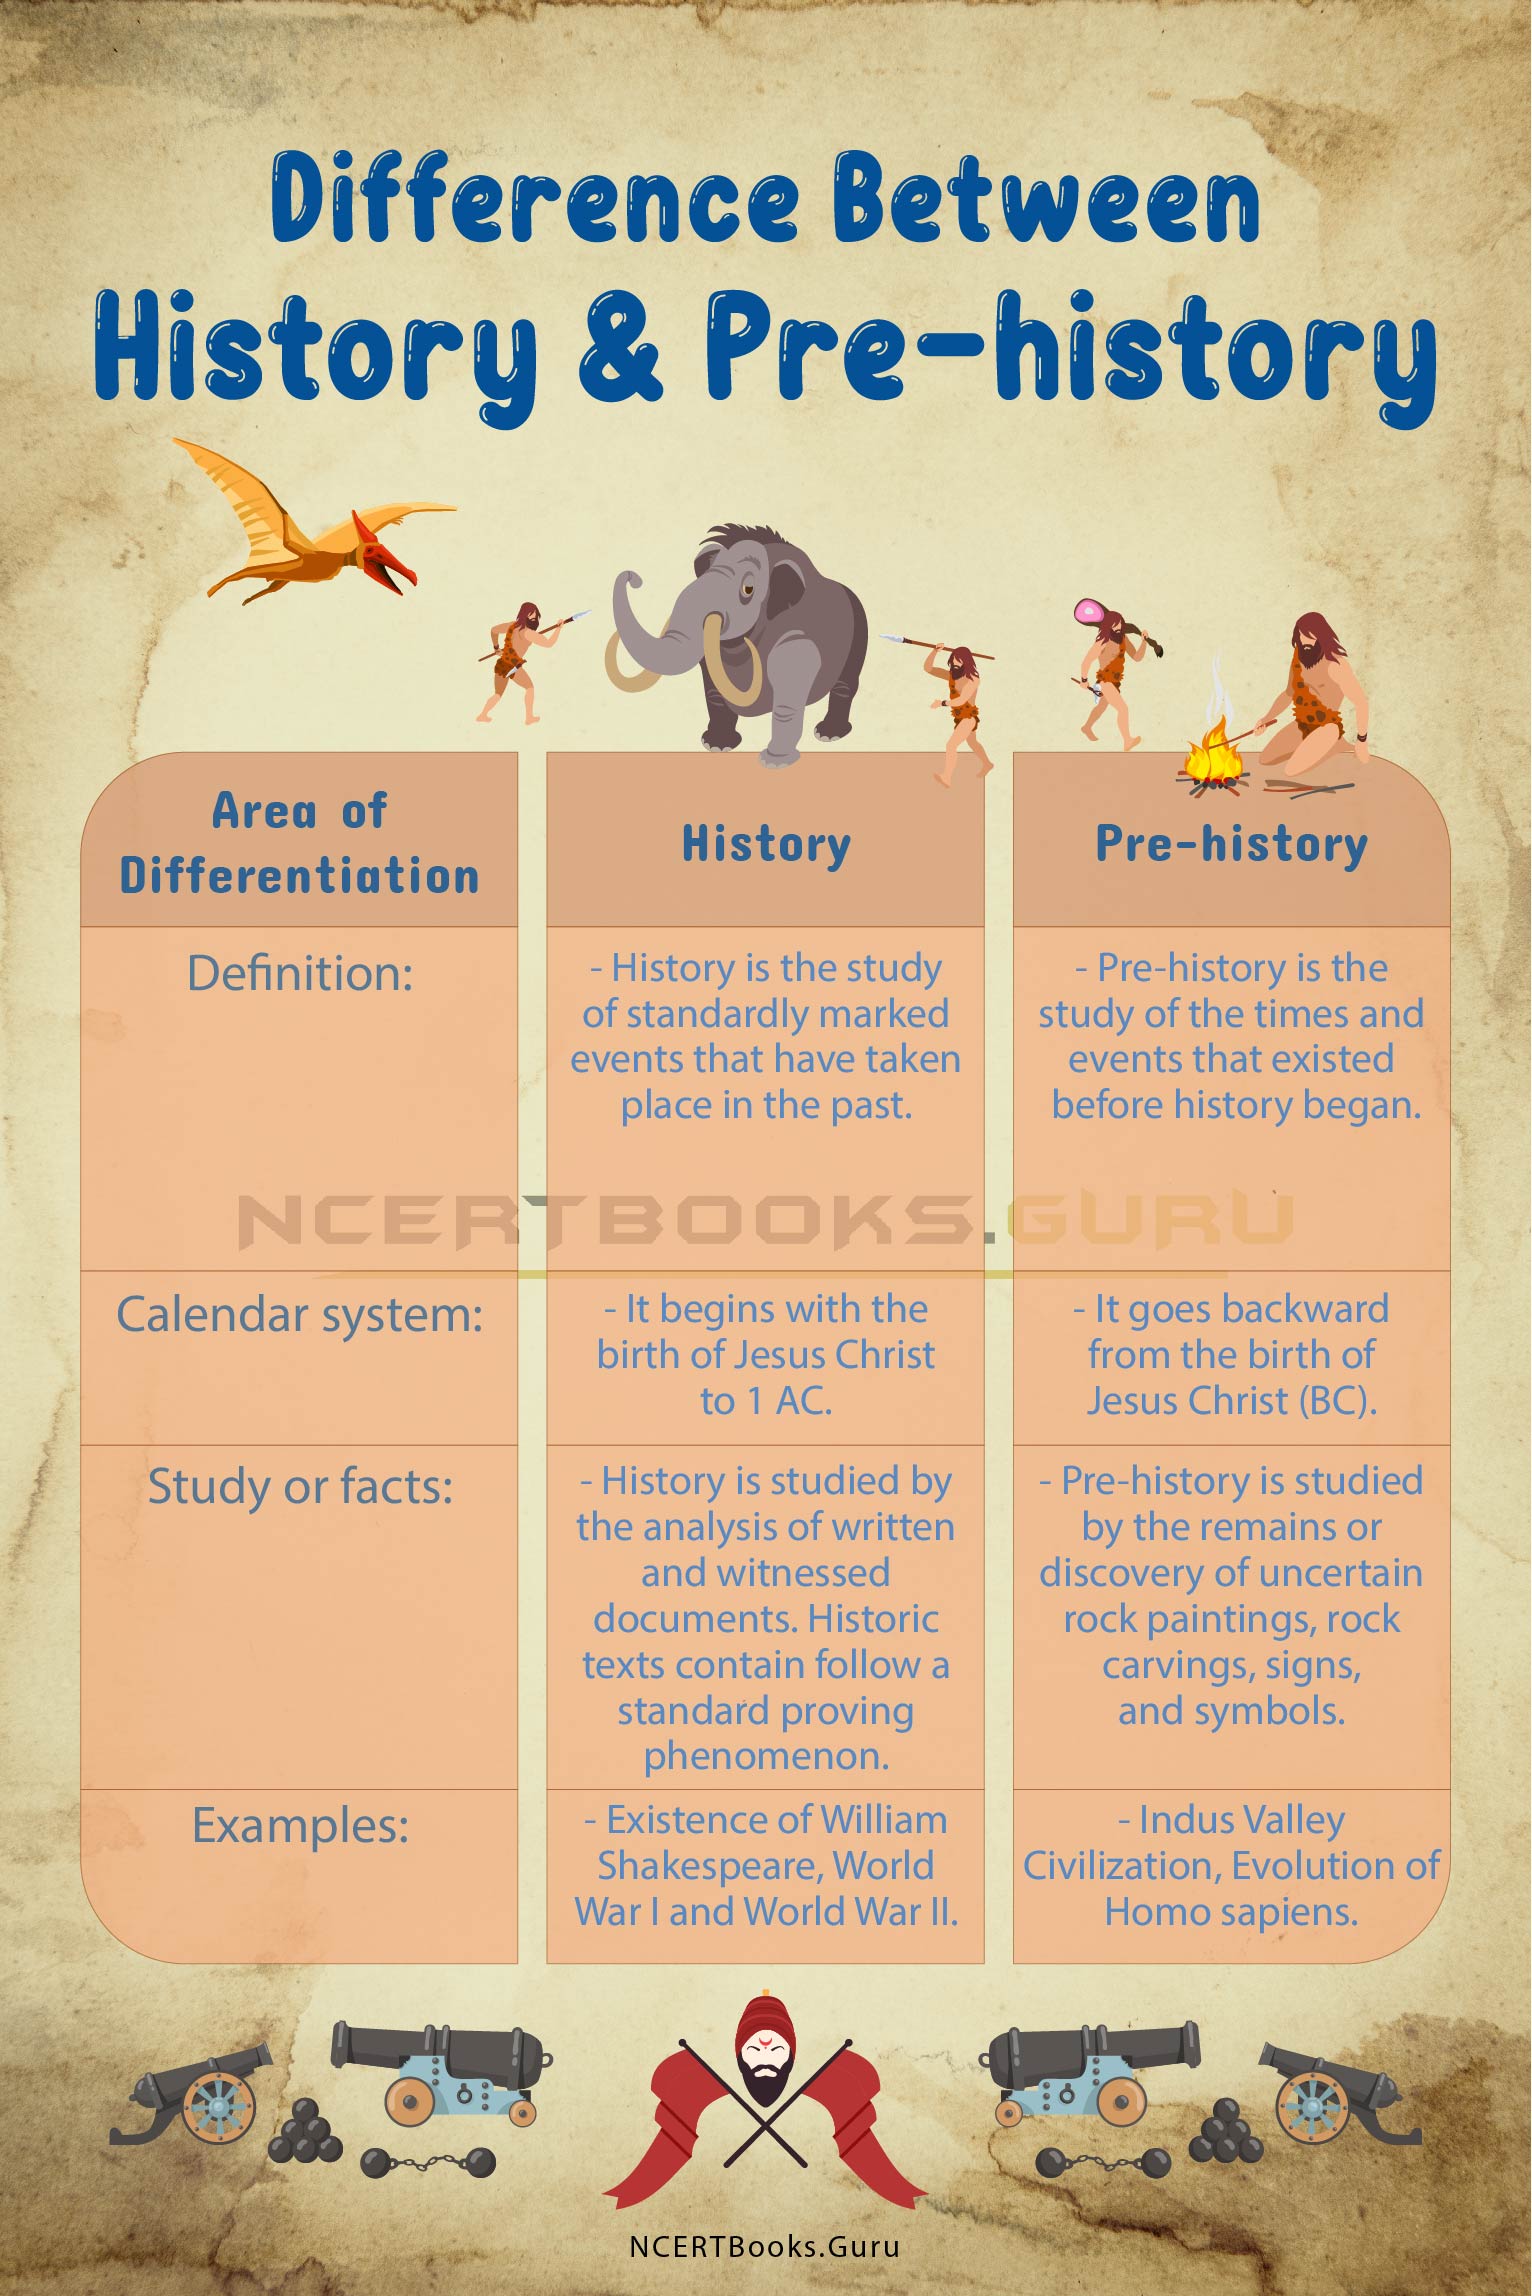 Difference Between History and Pre-history 2